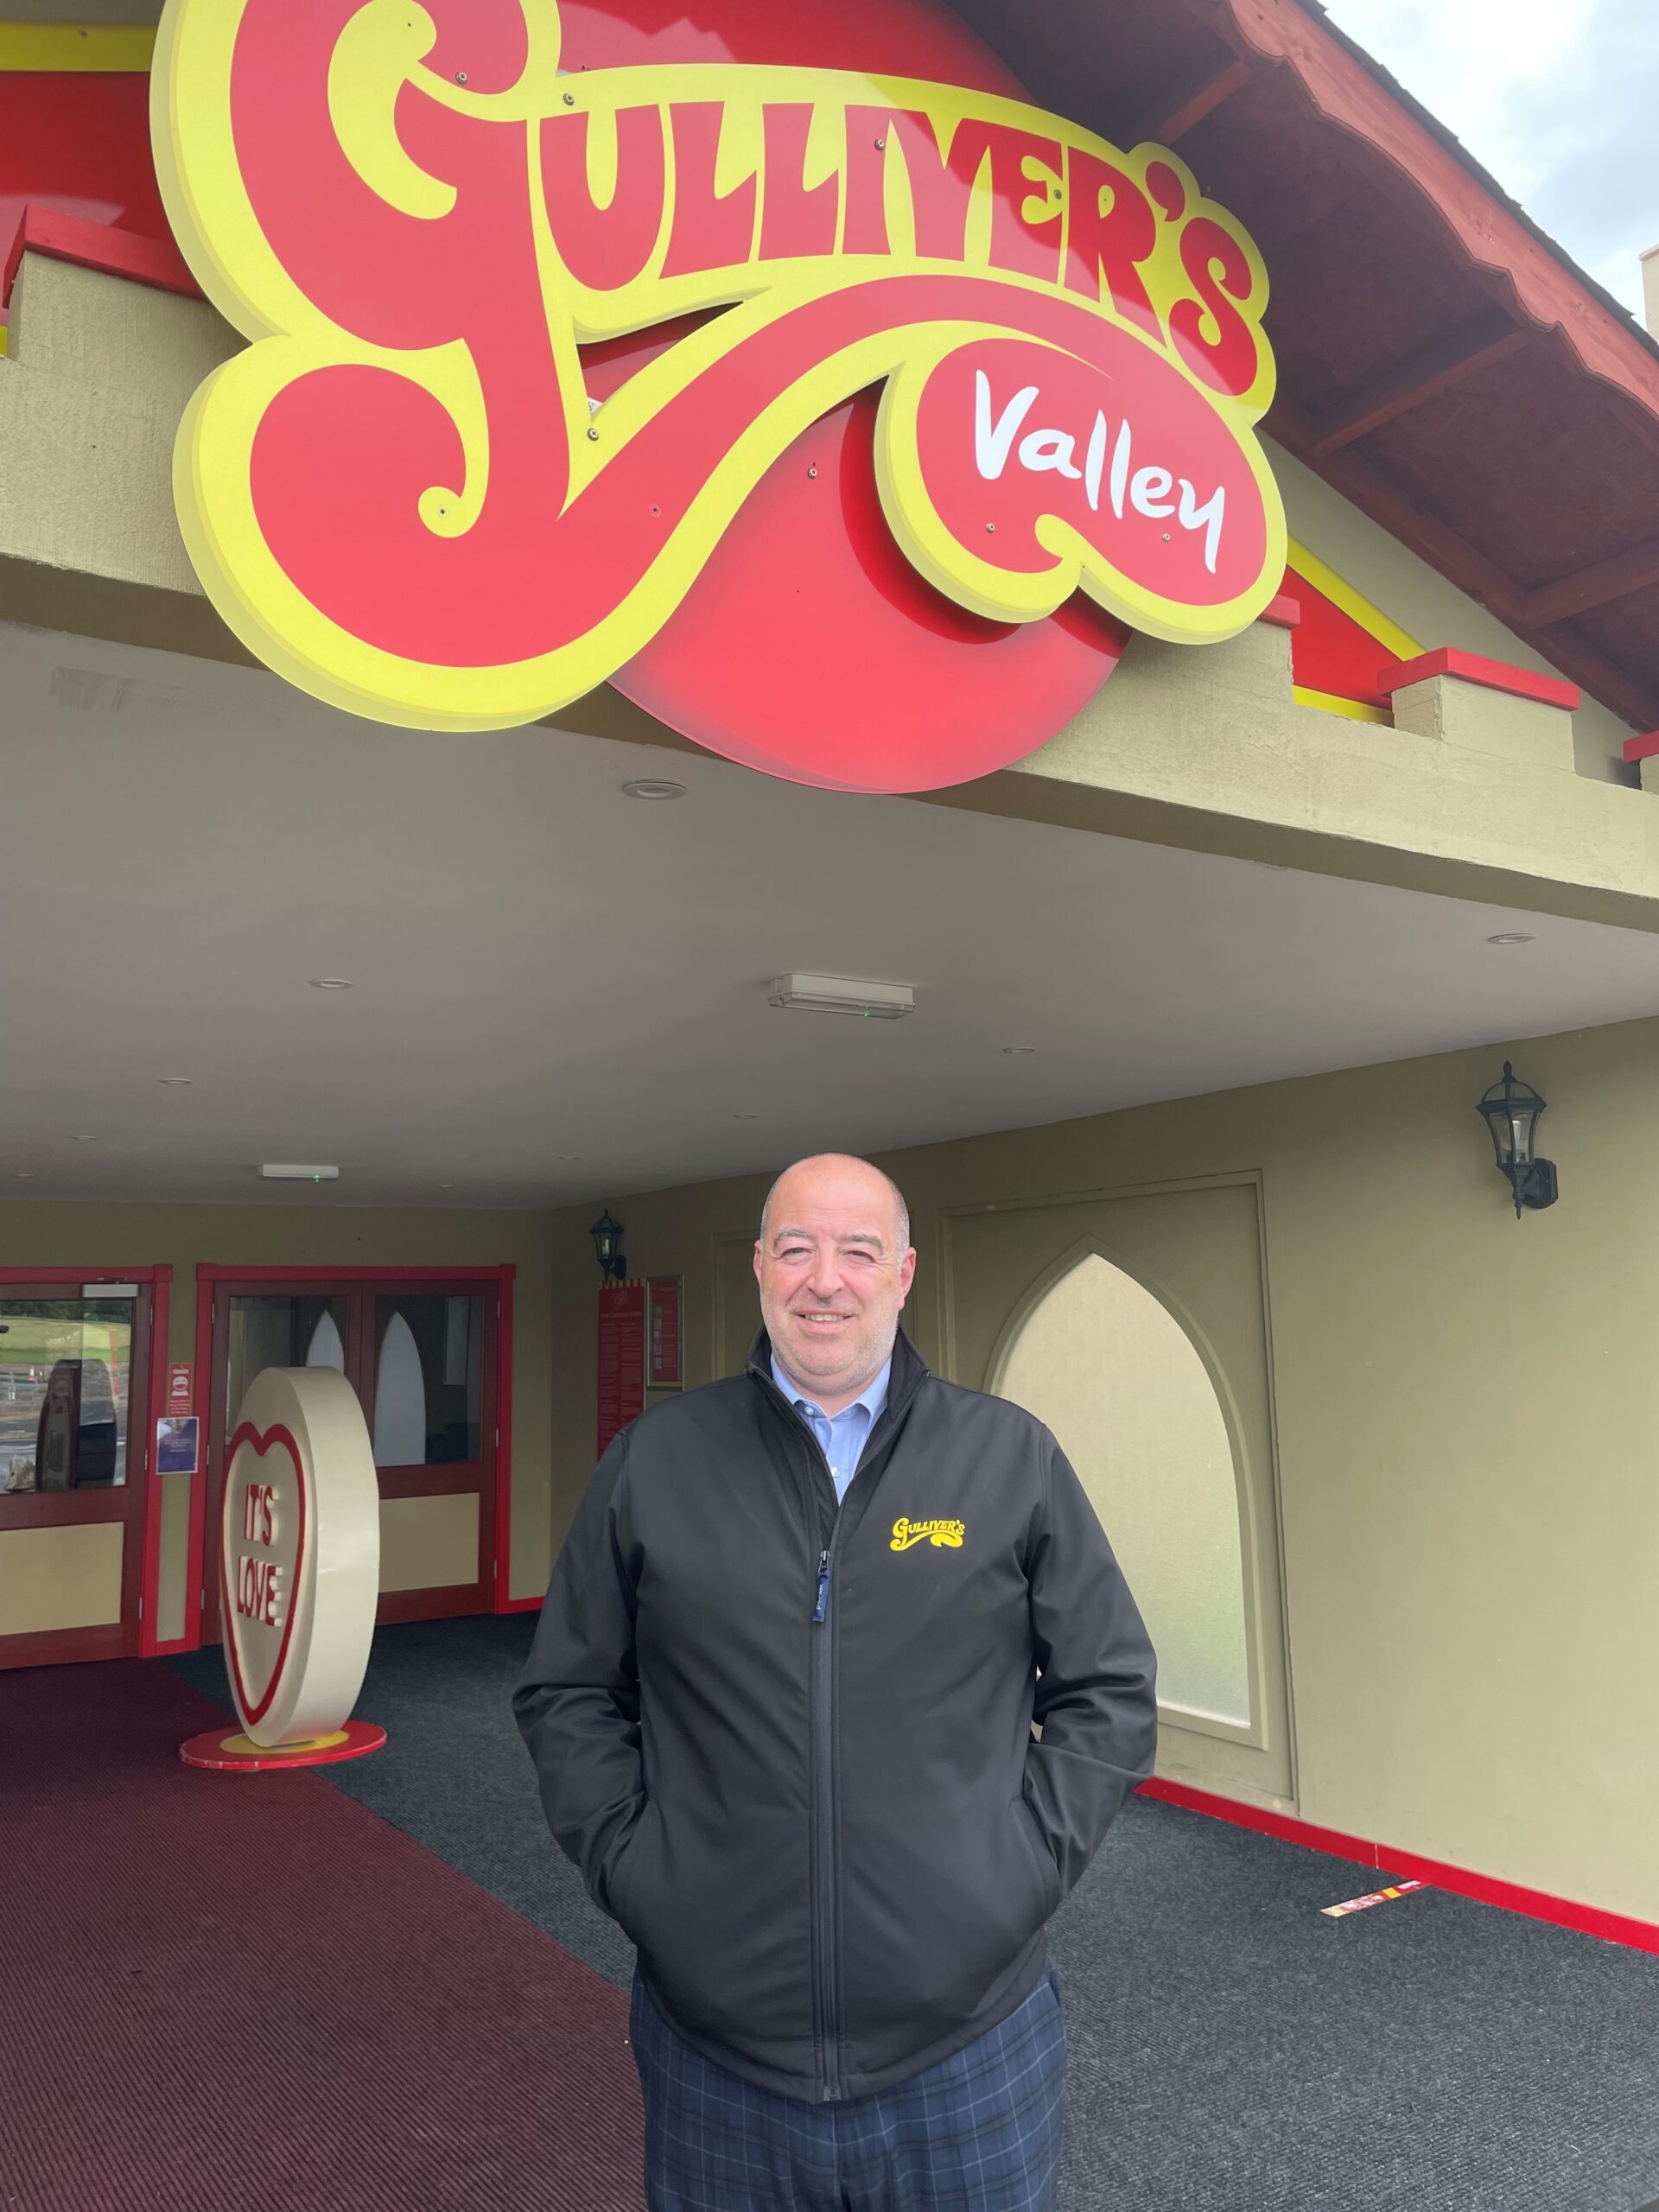 New resort manager welcomed to Gulliver’s Valley